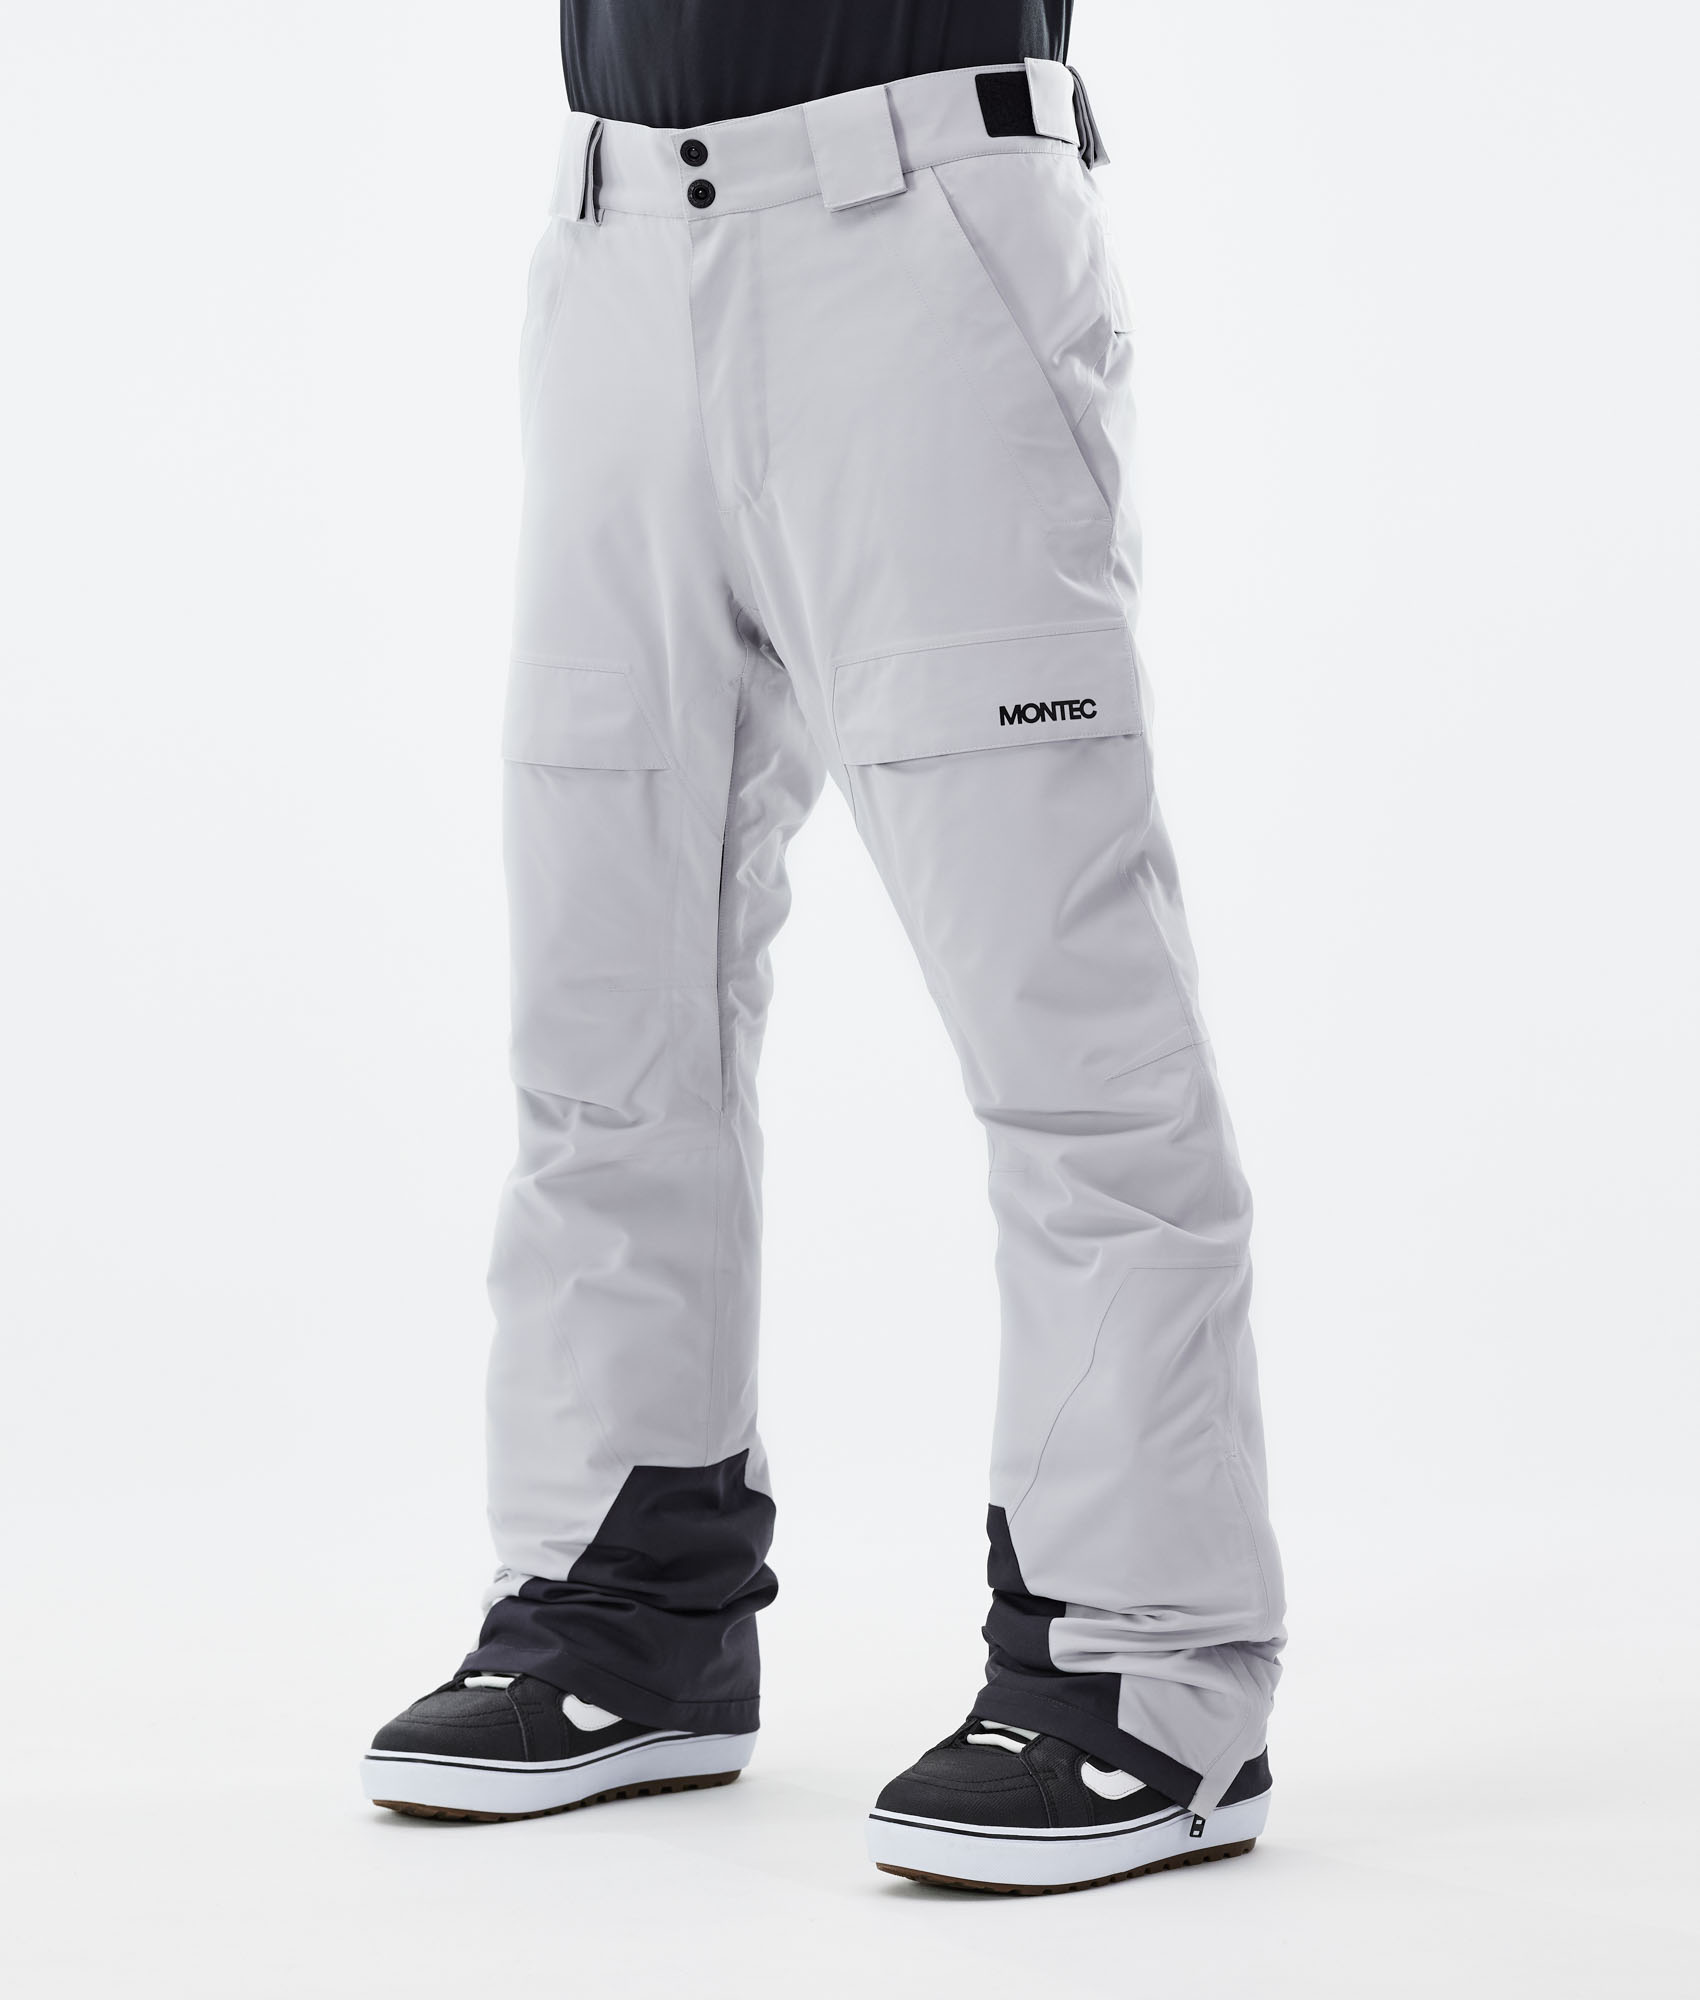 2016 NWT MENS ANALOG FIELD SNOWBOARD PANTS $180 faded slouch fit zip up 